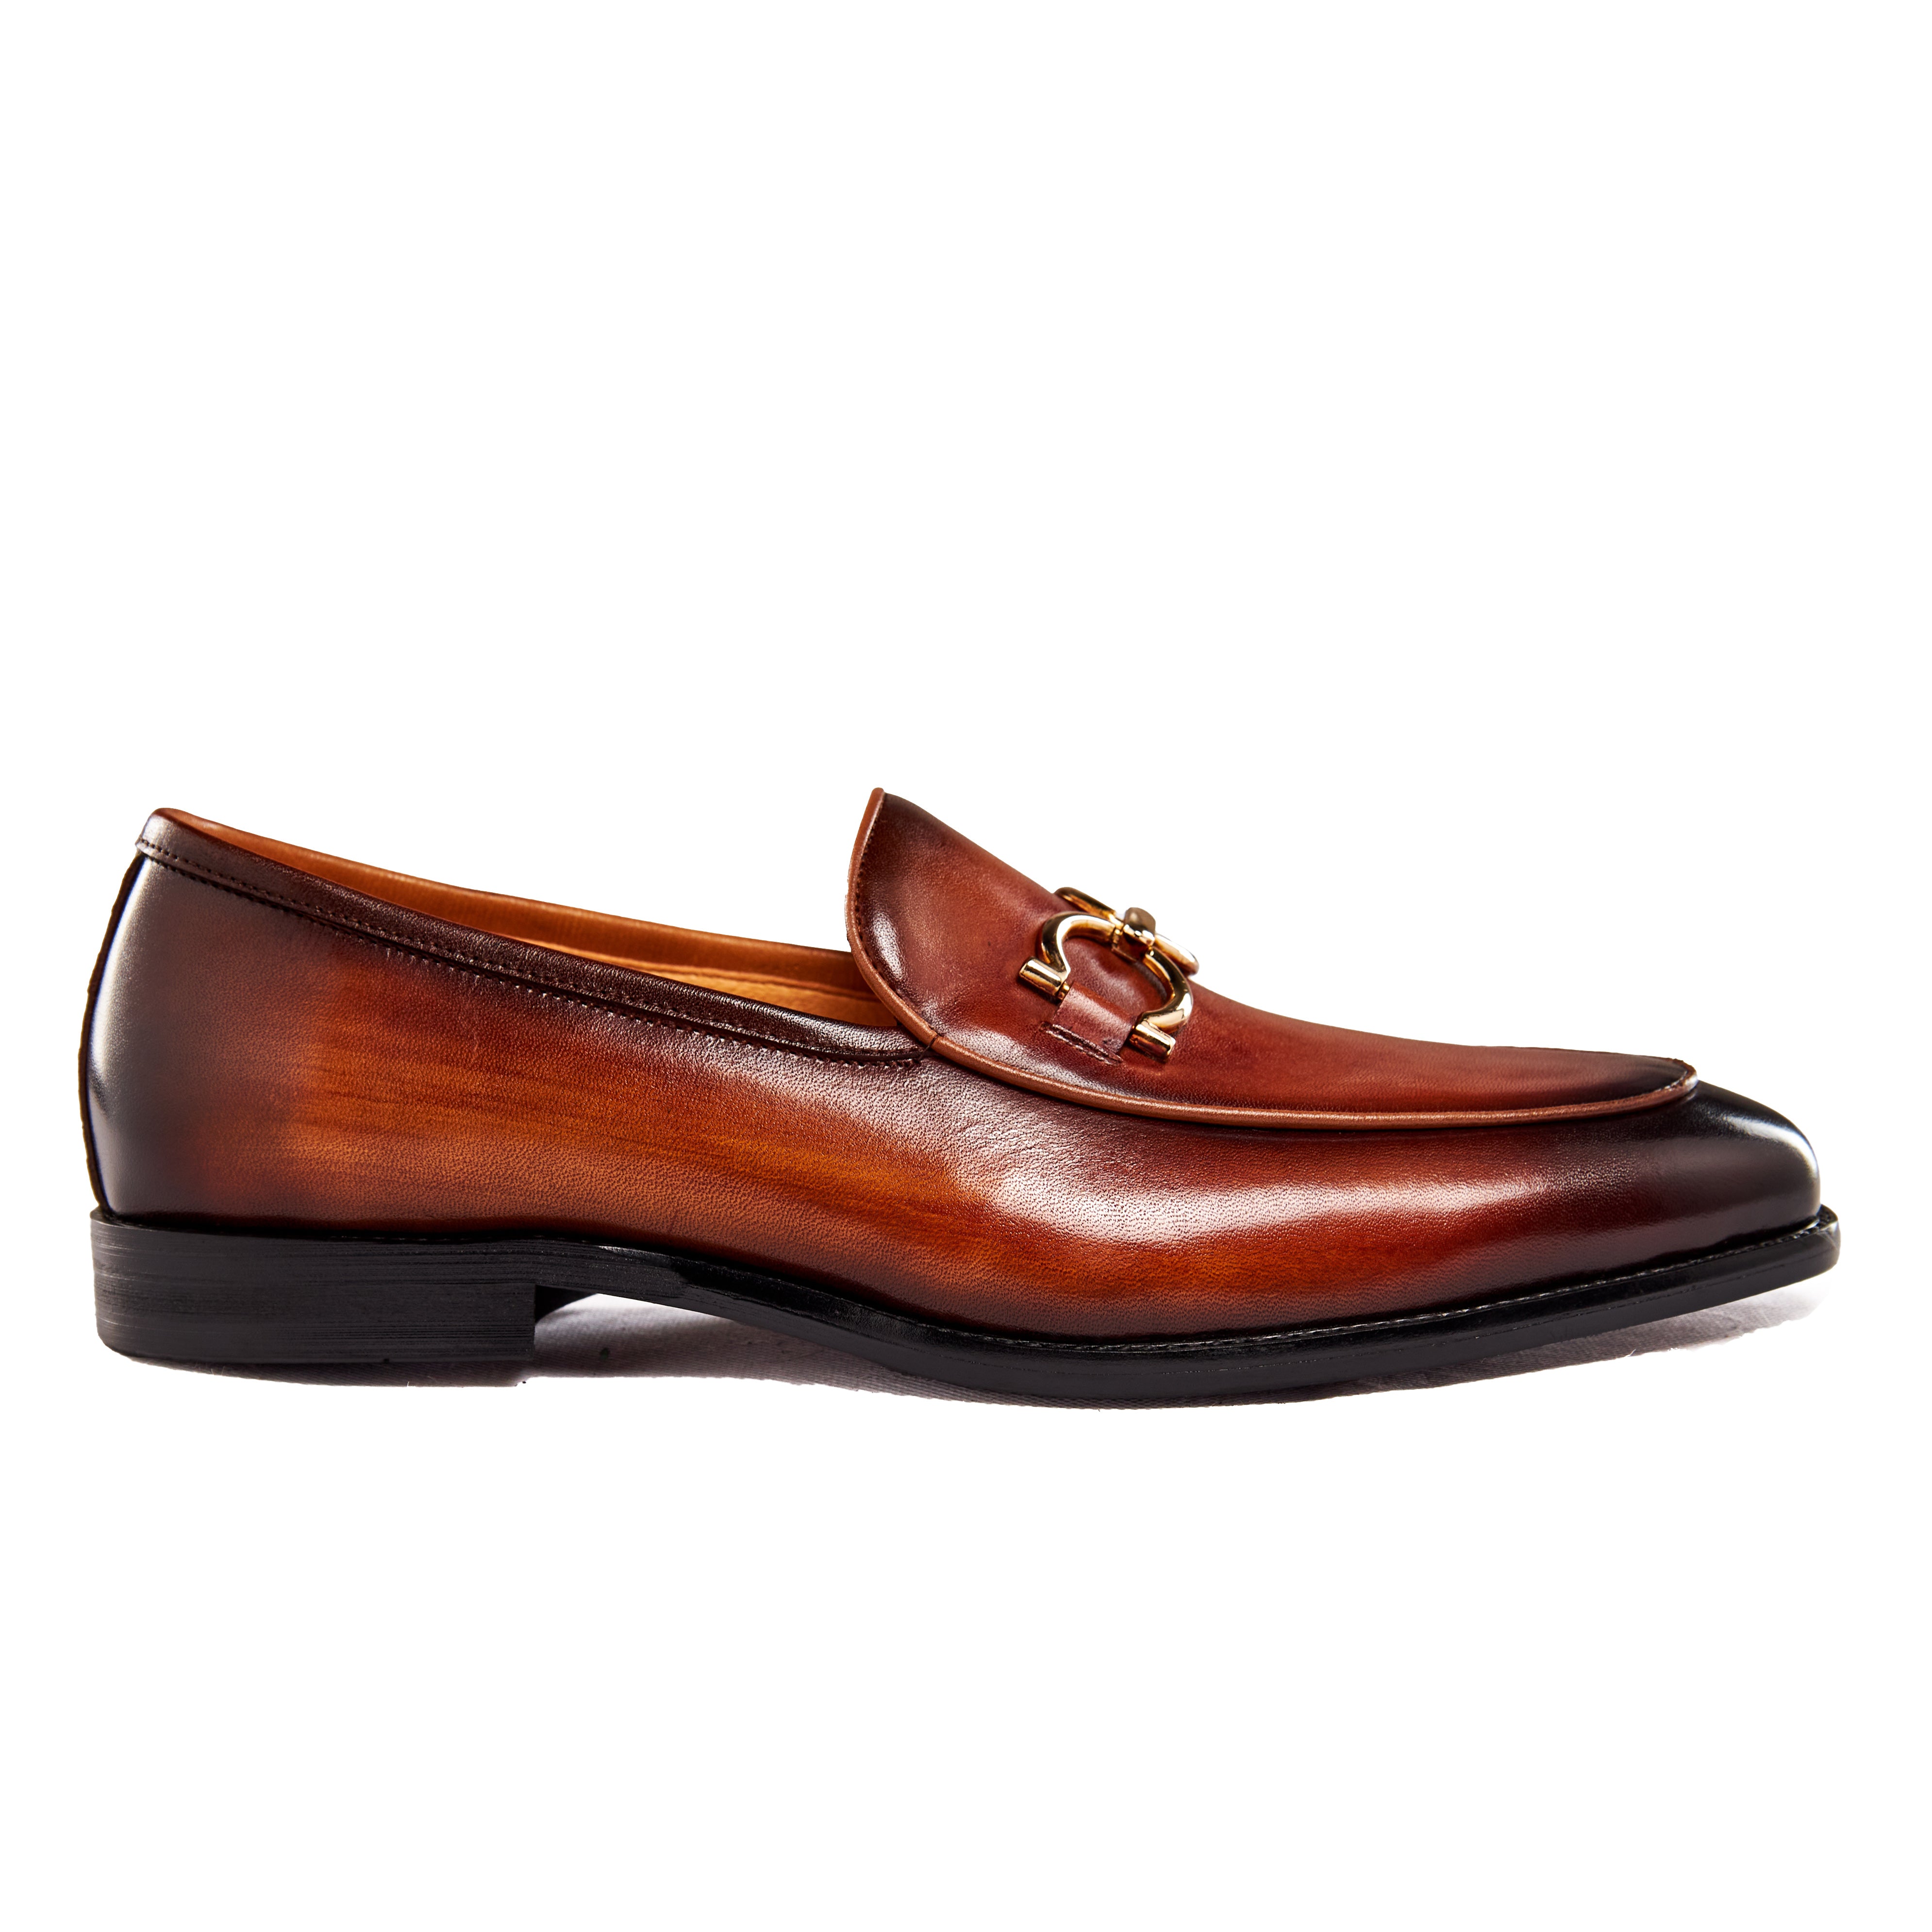 GOLD BUCKLE LOAFERS IN BROWN